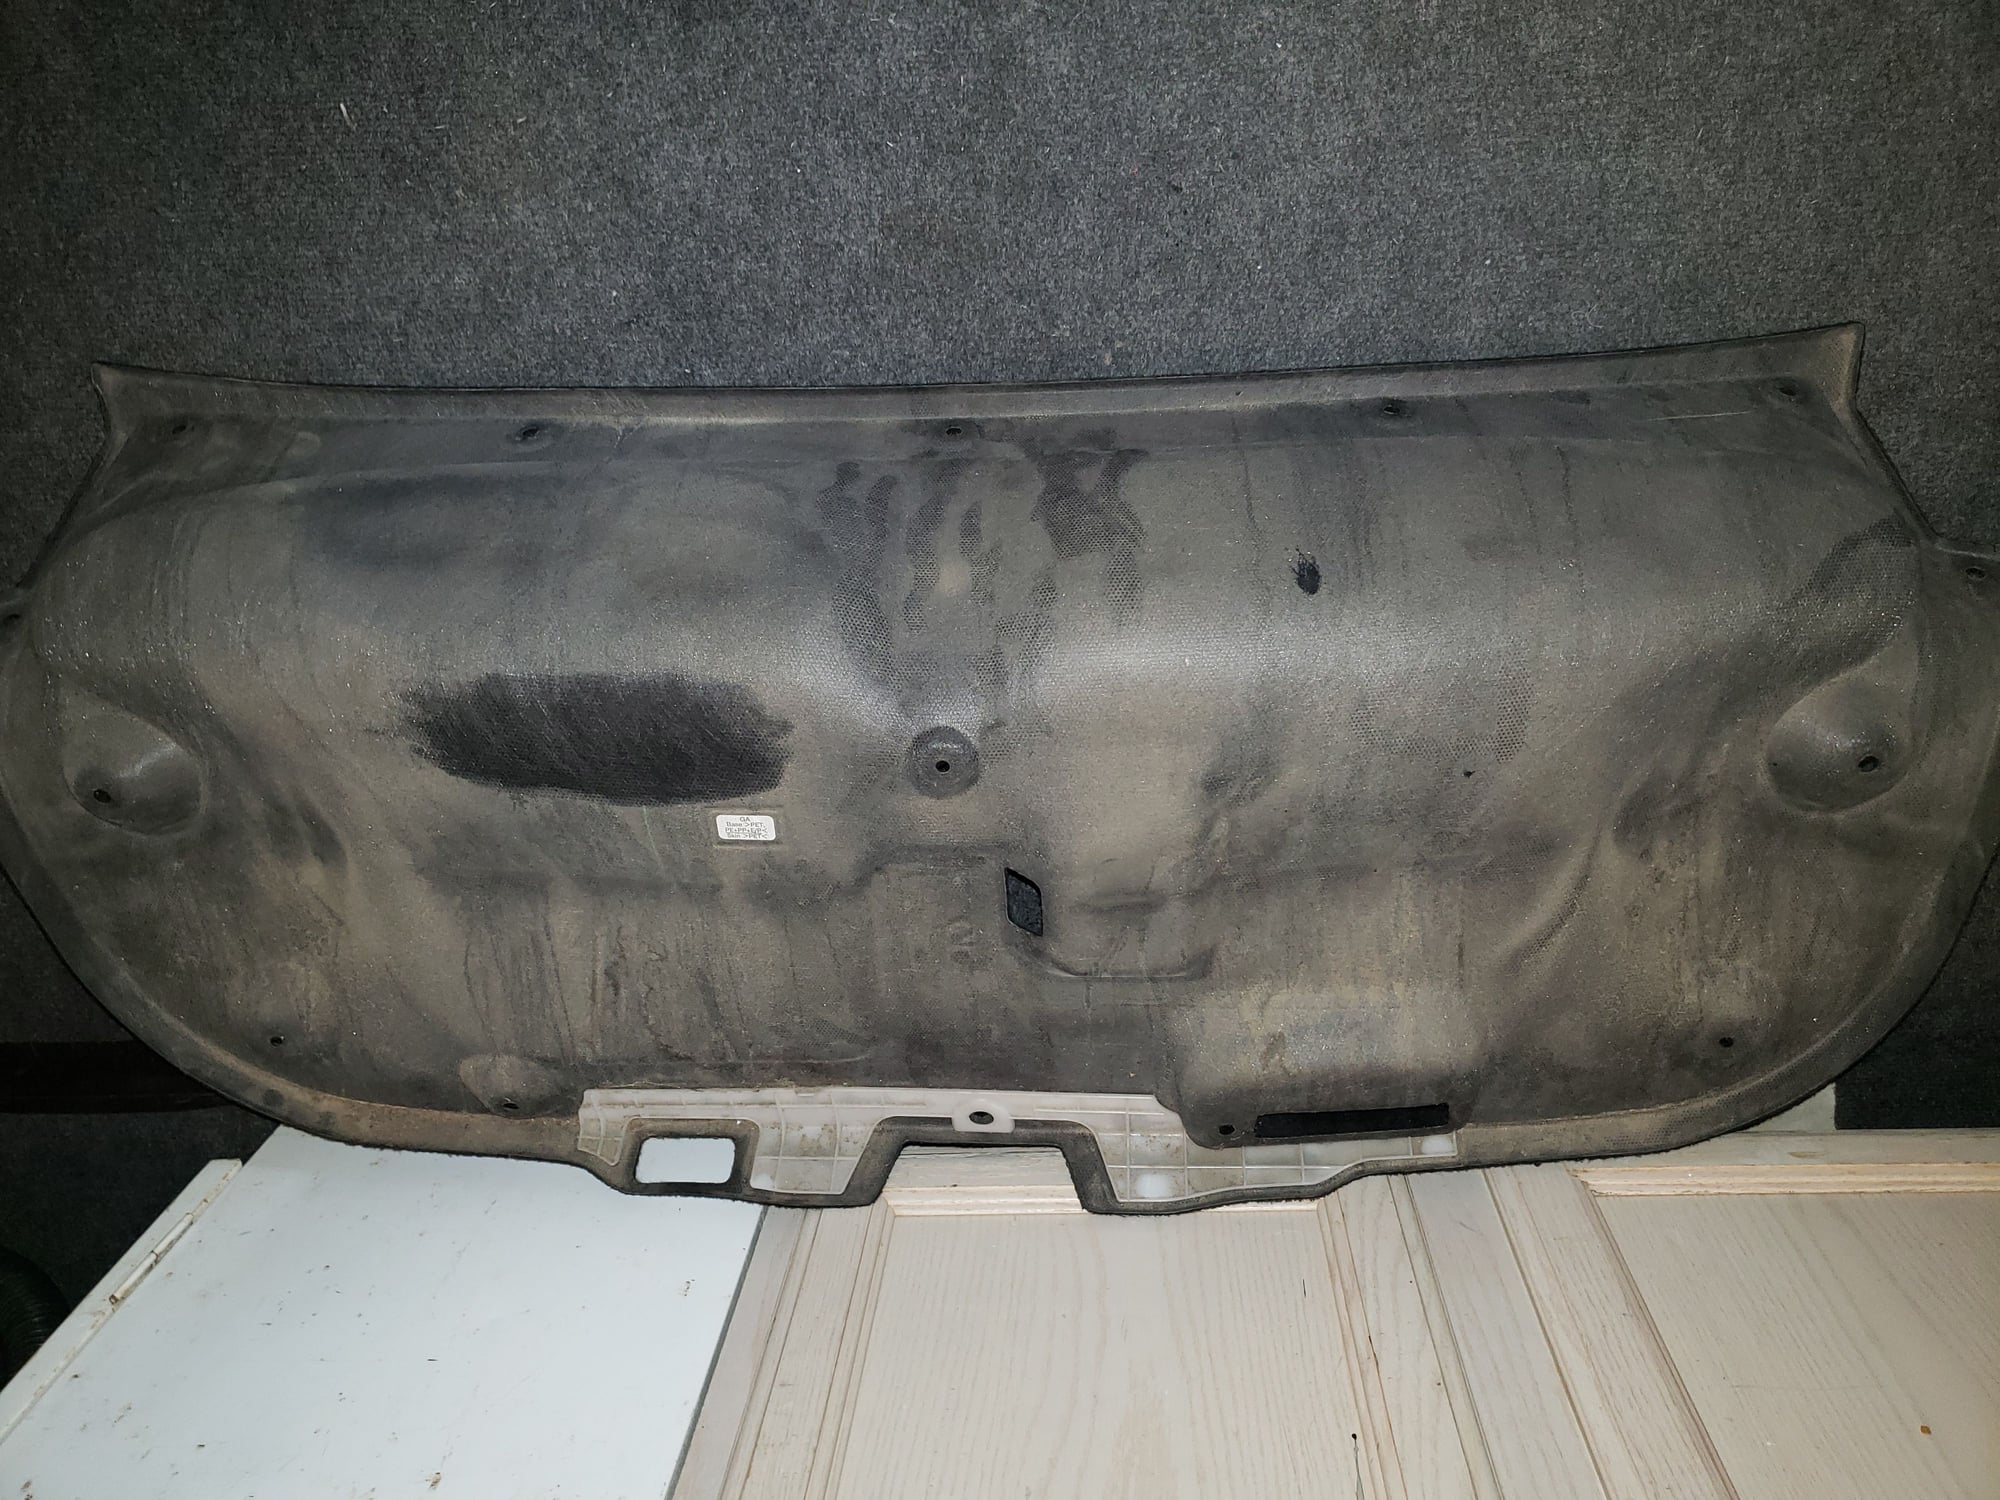 Rotten Egg Smell from Exhaust - Steps Taken to Keep It Out of the Car